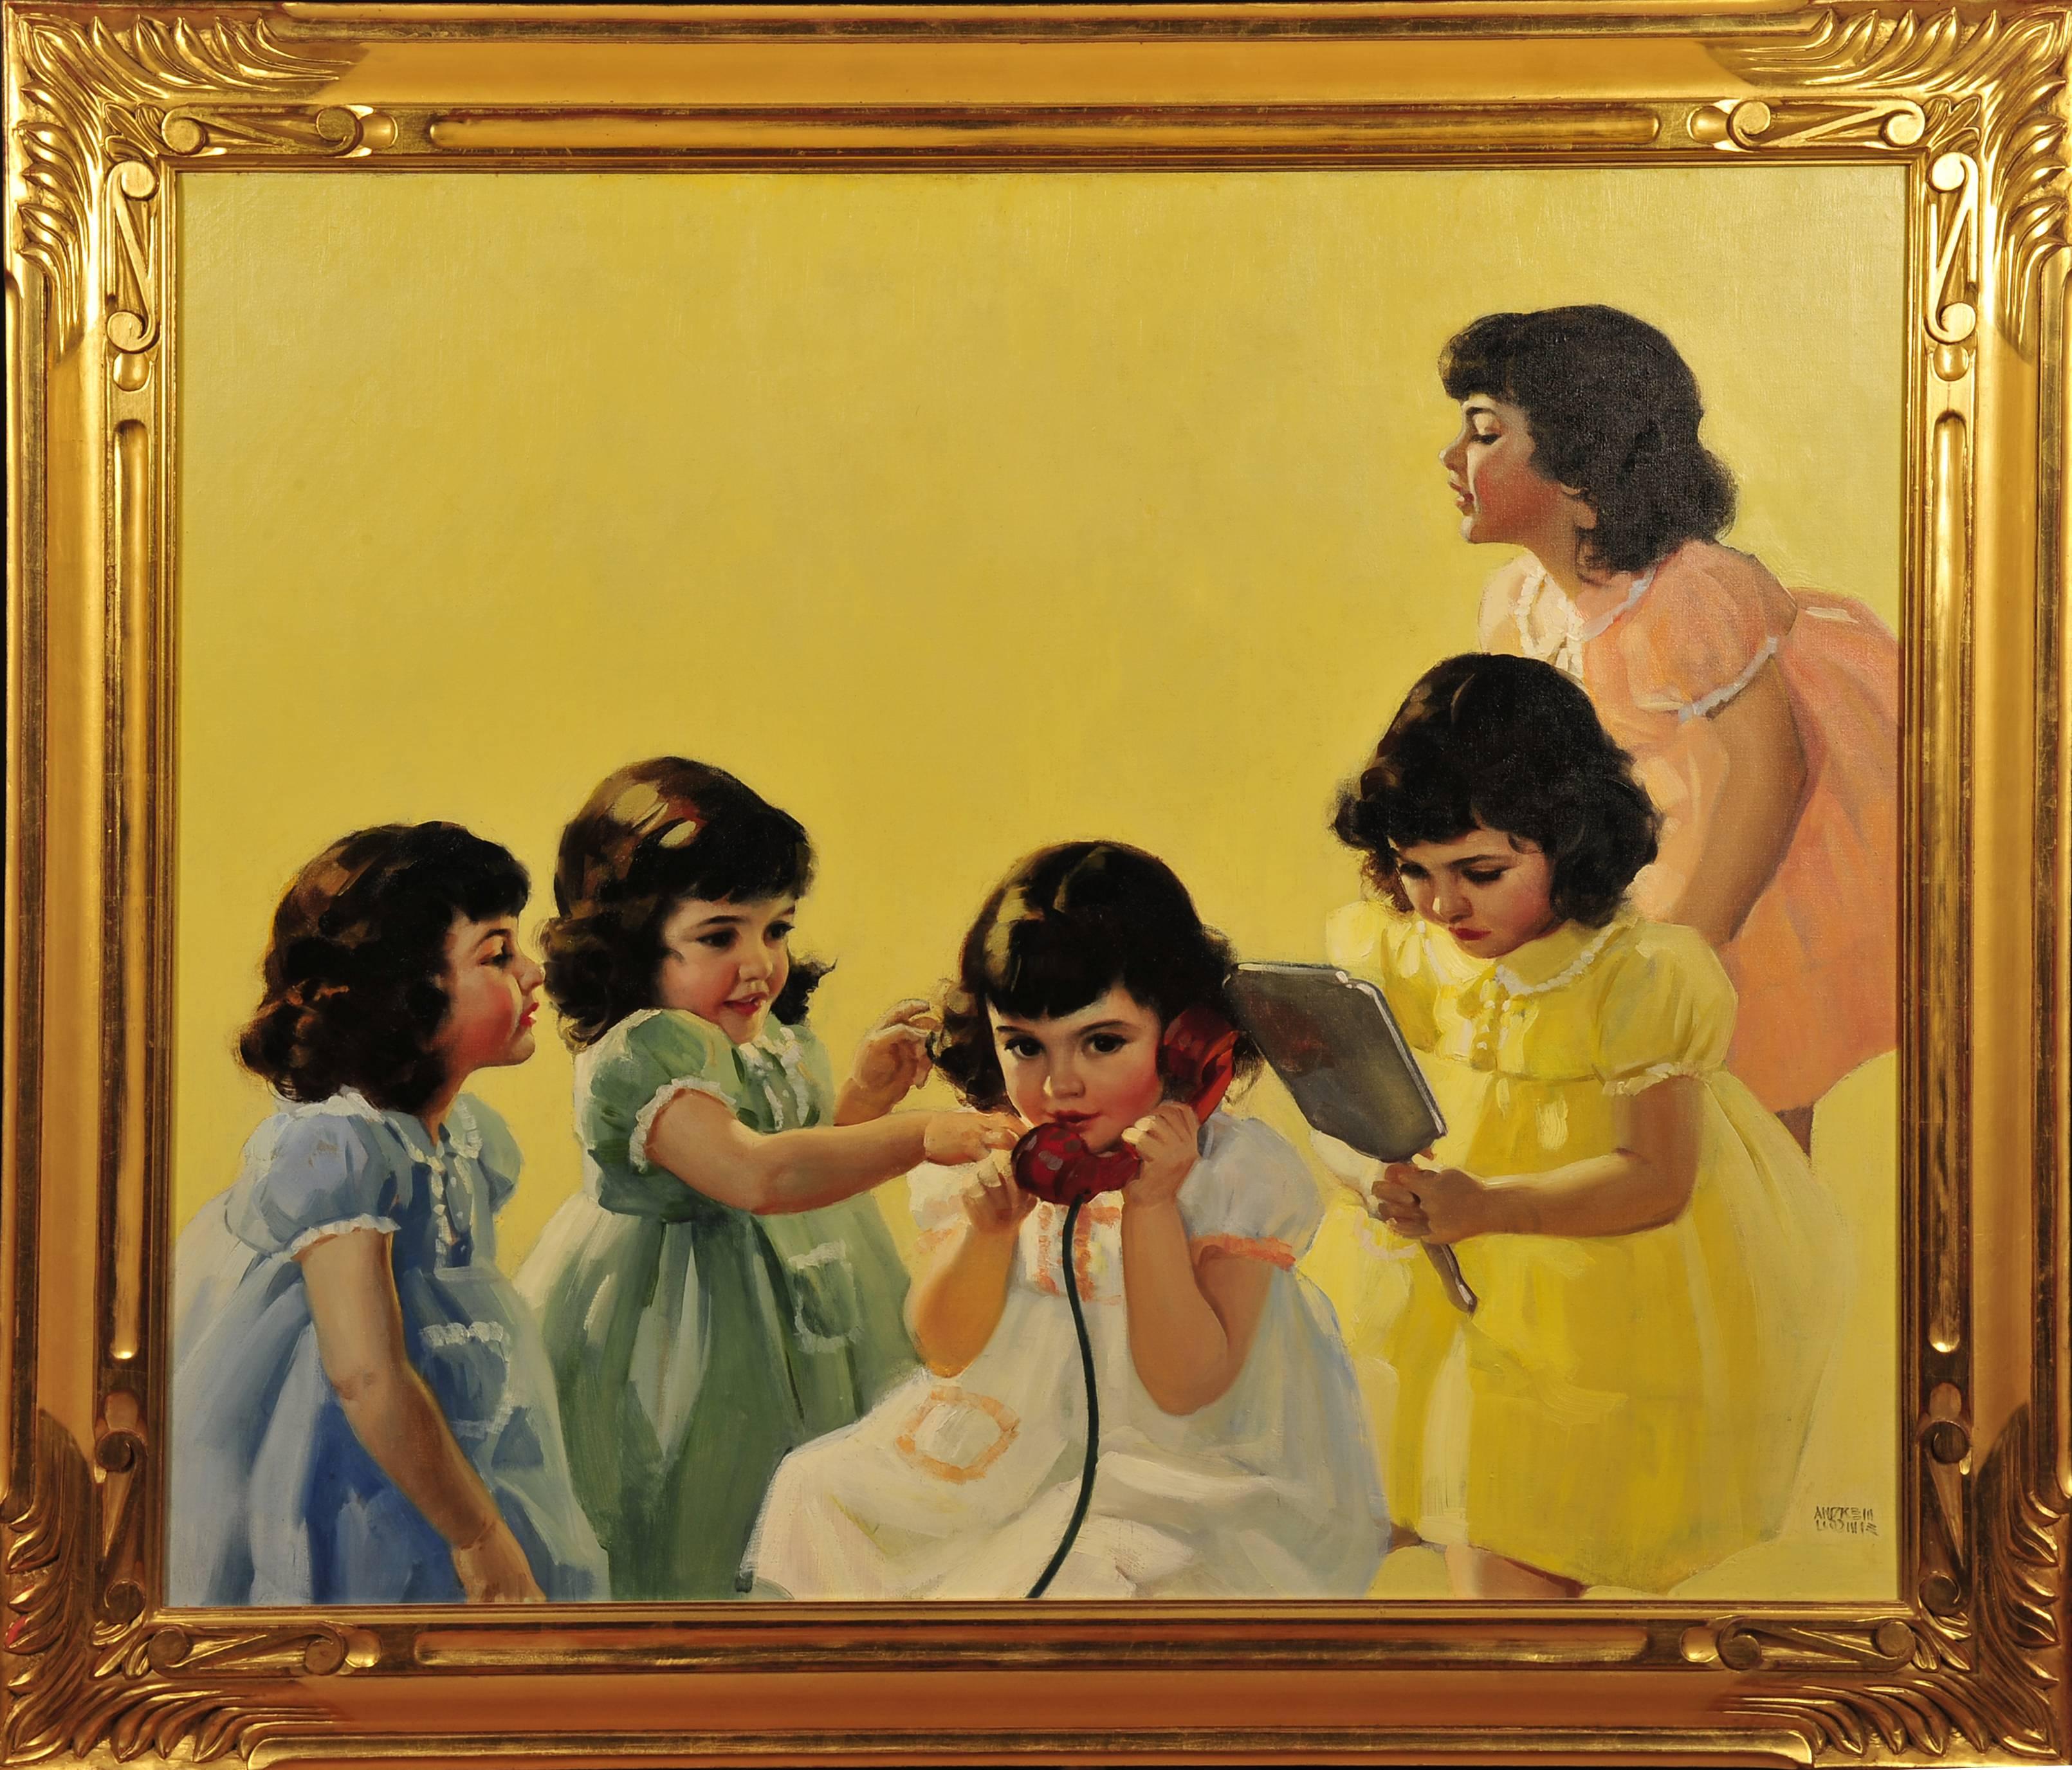 Dionne Quintuplets - Calendar Illustration - Other Art Style Painting by Andrew Loomis